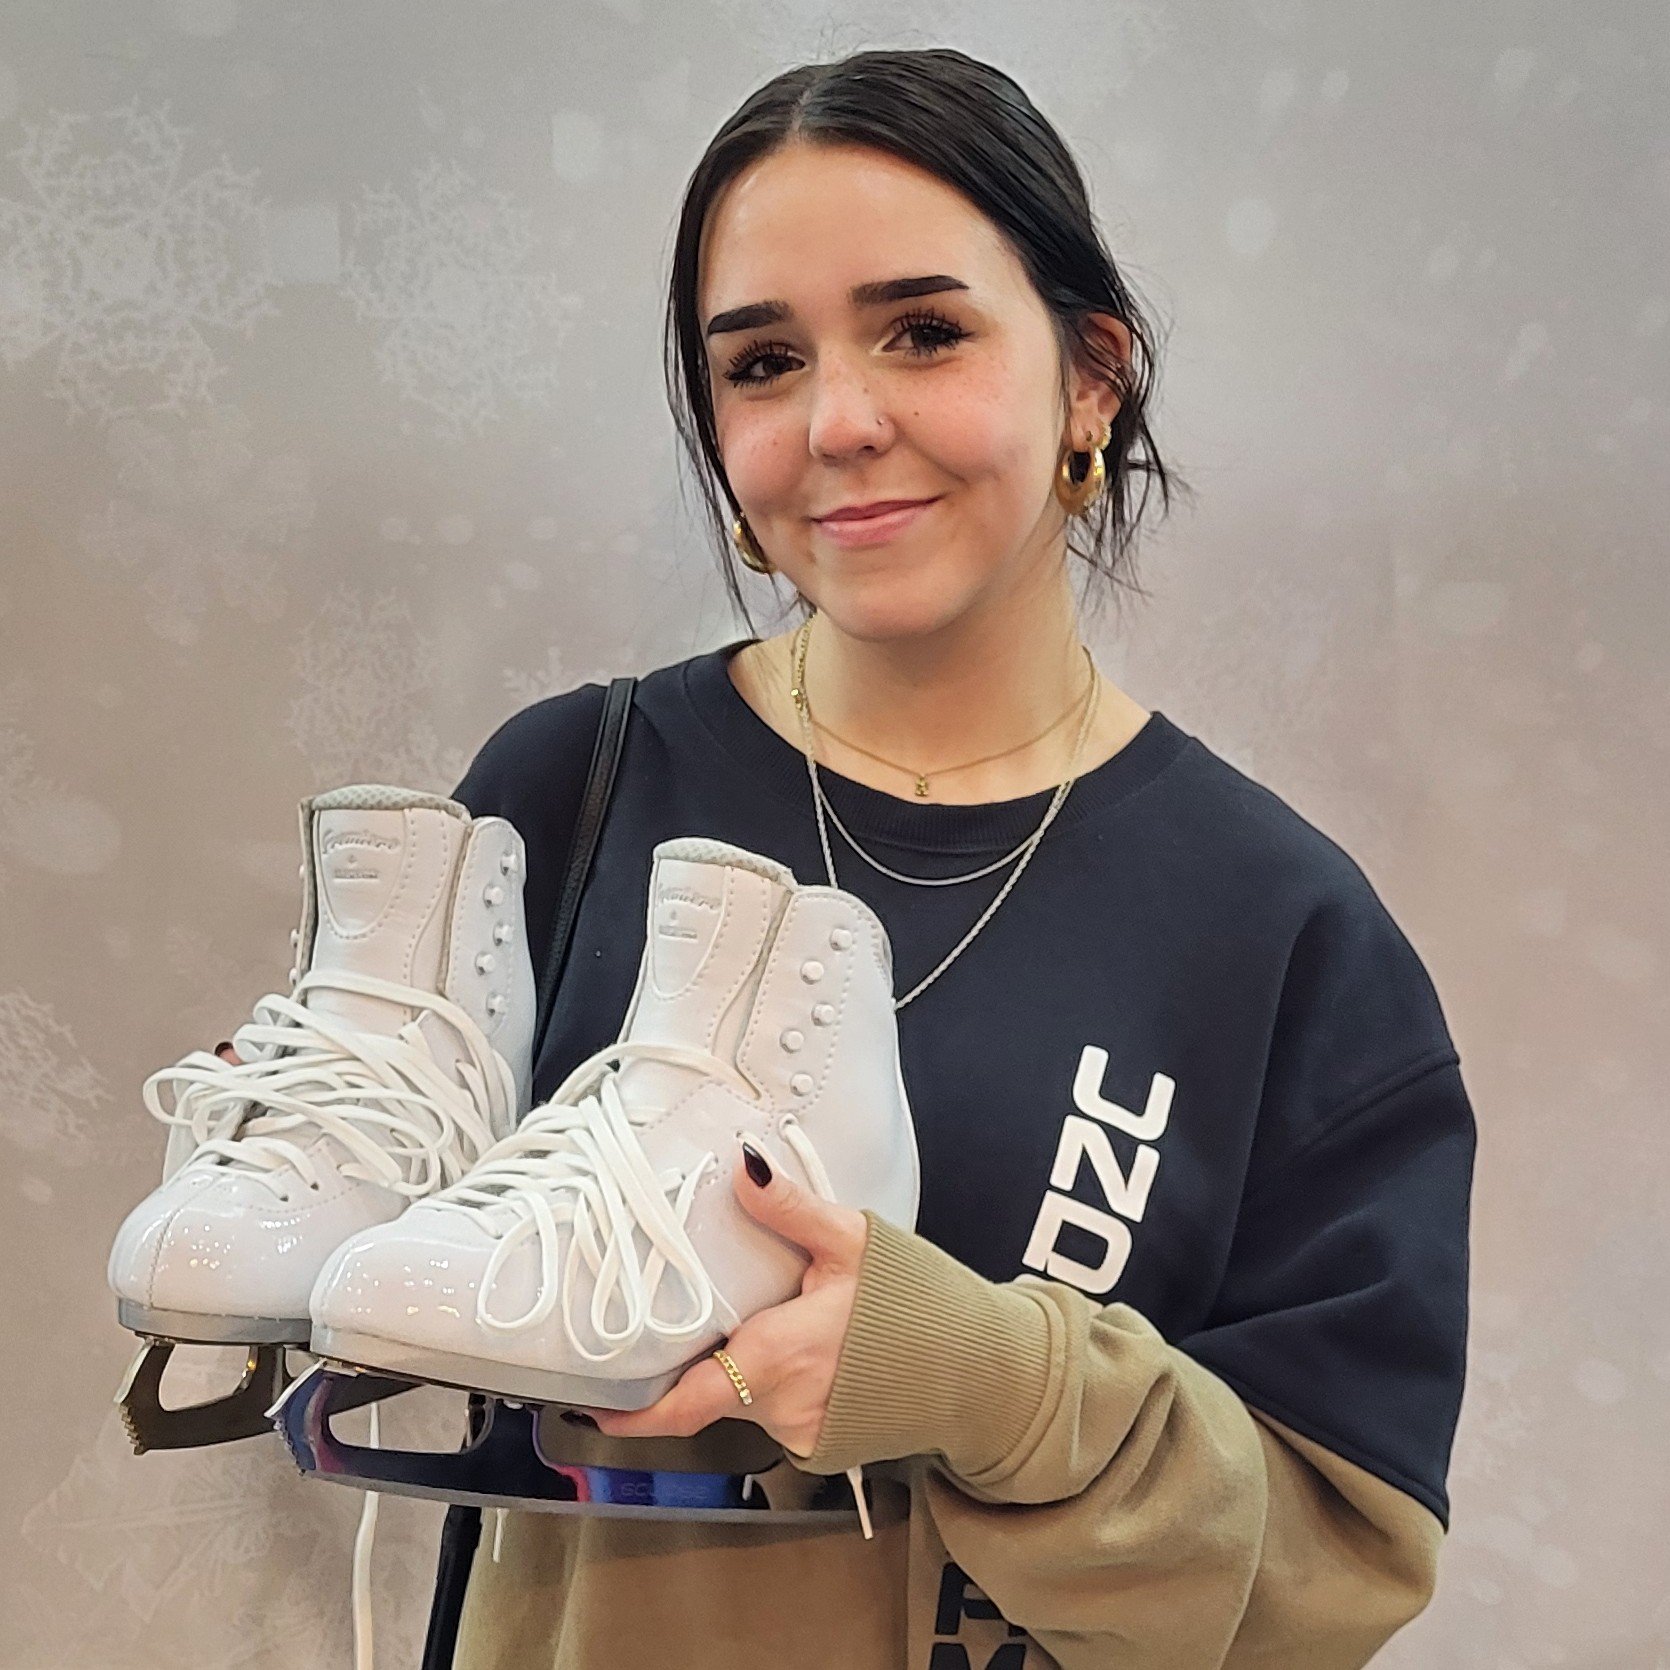 Angelina has BIG goals which need the right skates to support them 😎

She tried to DIY the fit of her first beginner pair of skates. Her correct size felt too snug. She whole-sized up (oops 🙈) and now her foot is slipping around inside the skate!

